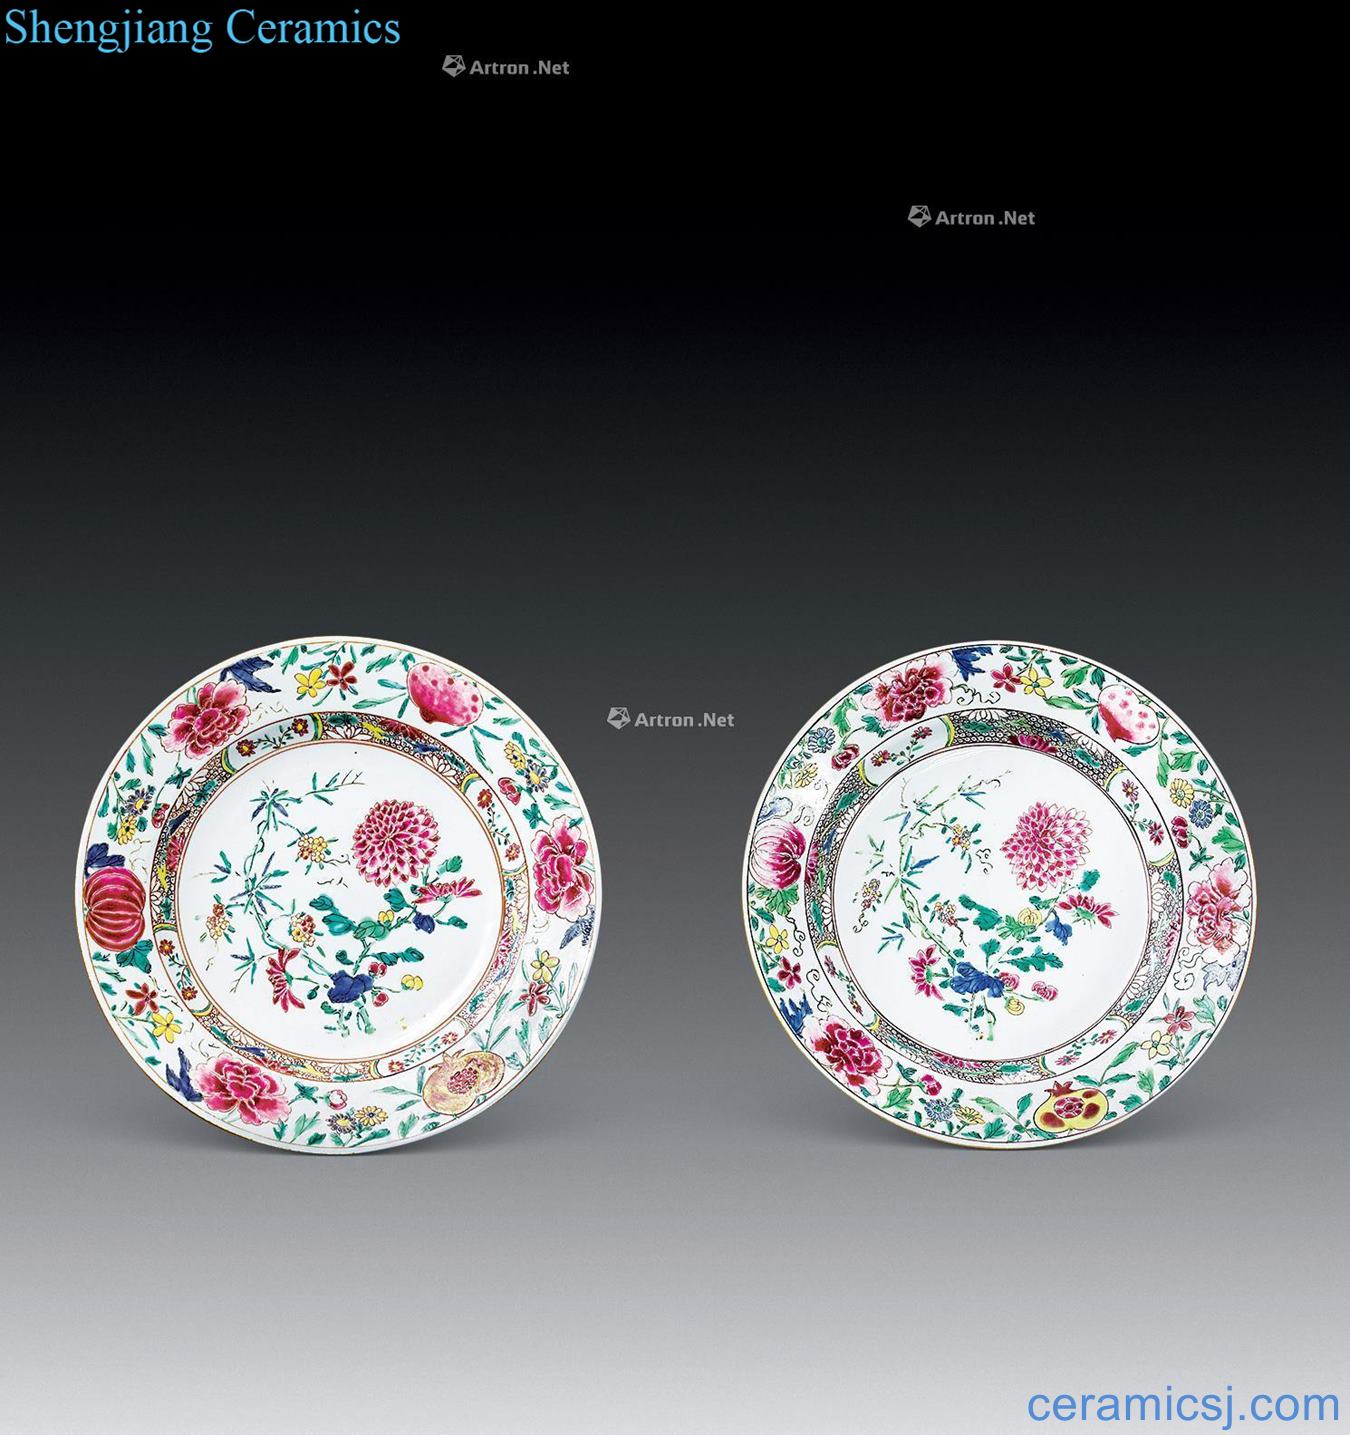 Pastel peony grains disc (a) in the qing dynasty